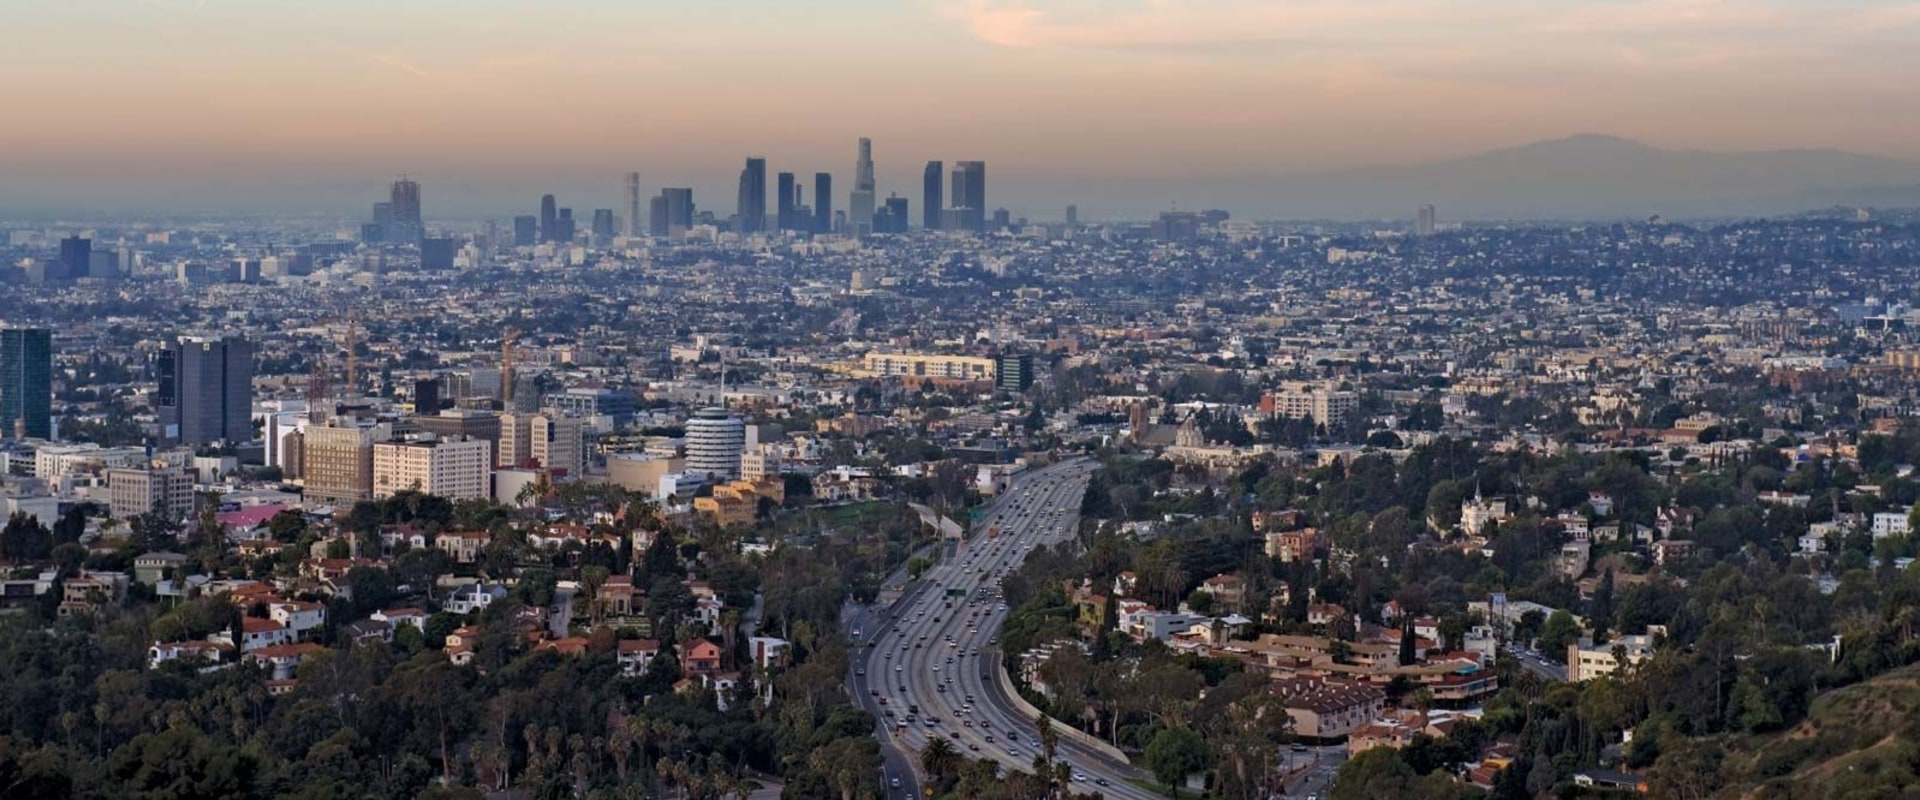 In which state is los angeles located?